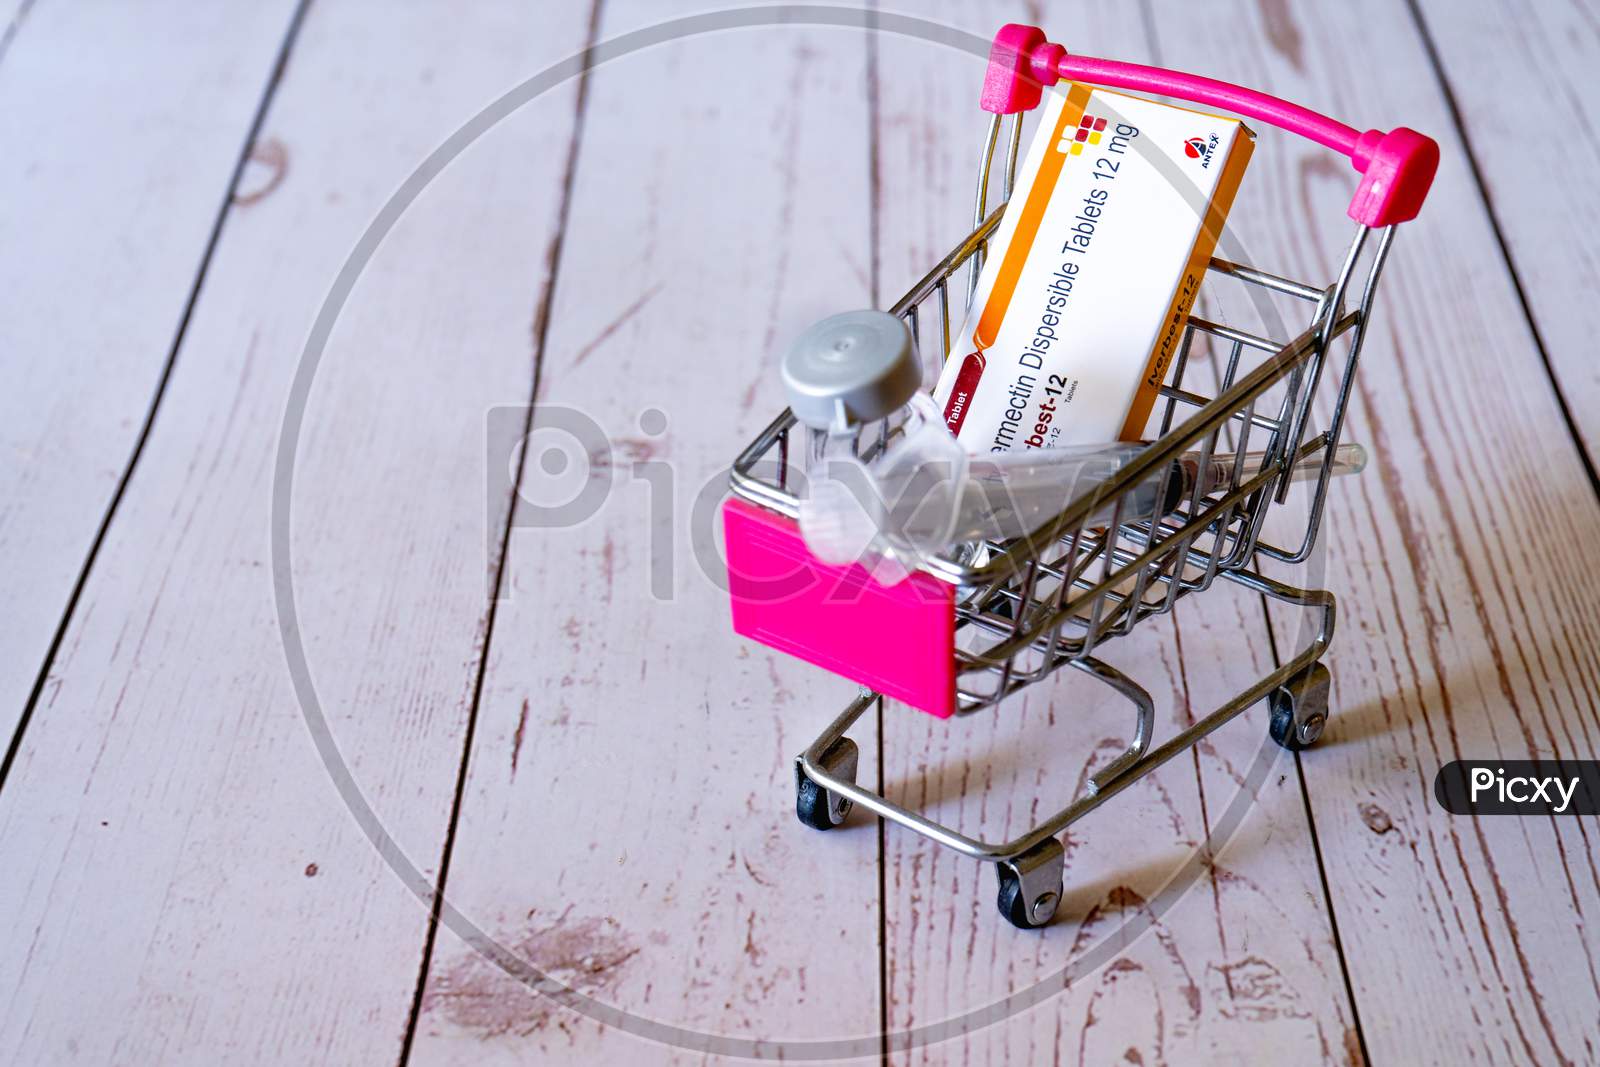 Mini Shopping Cart With A Dose Of Ivermectin Iverbest Tablets With A Syringe And Vial Ampoule Showing Care For Covid19 Coronavirus At Home Available For Purchase Online